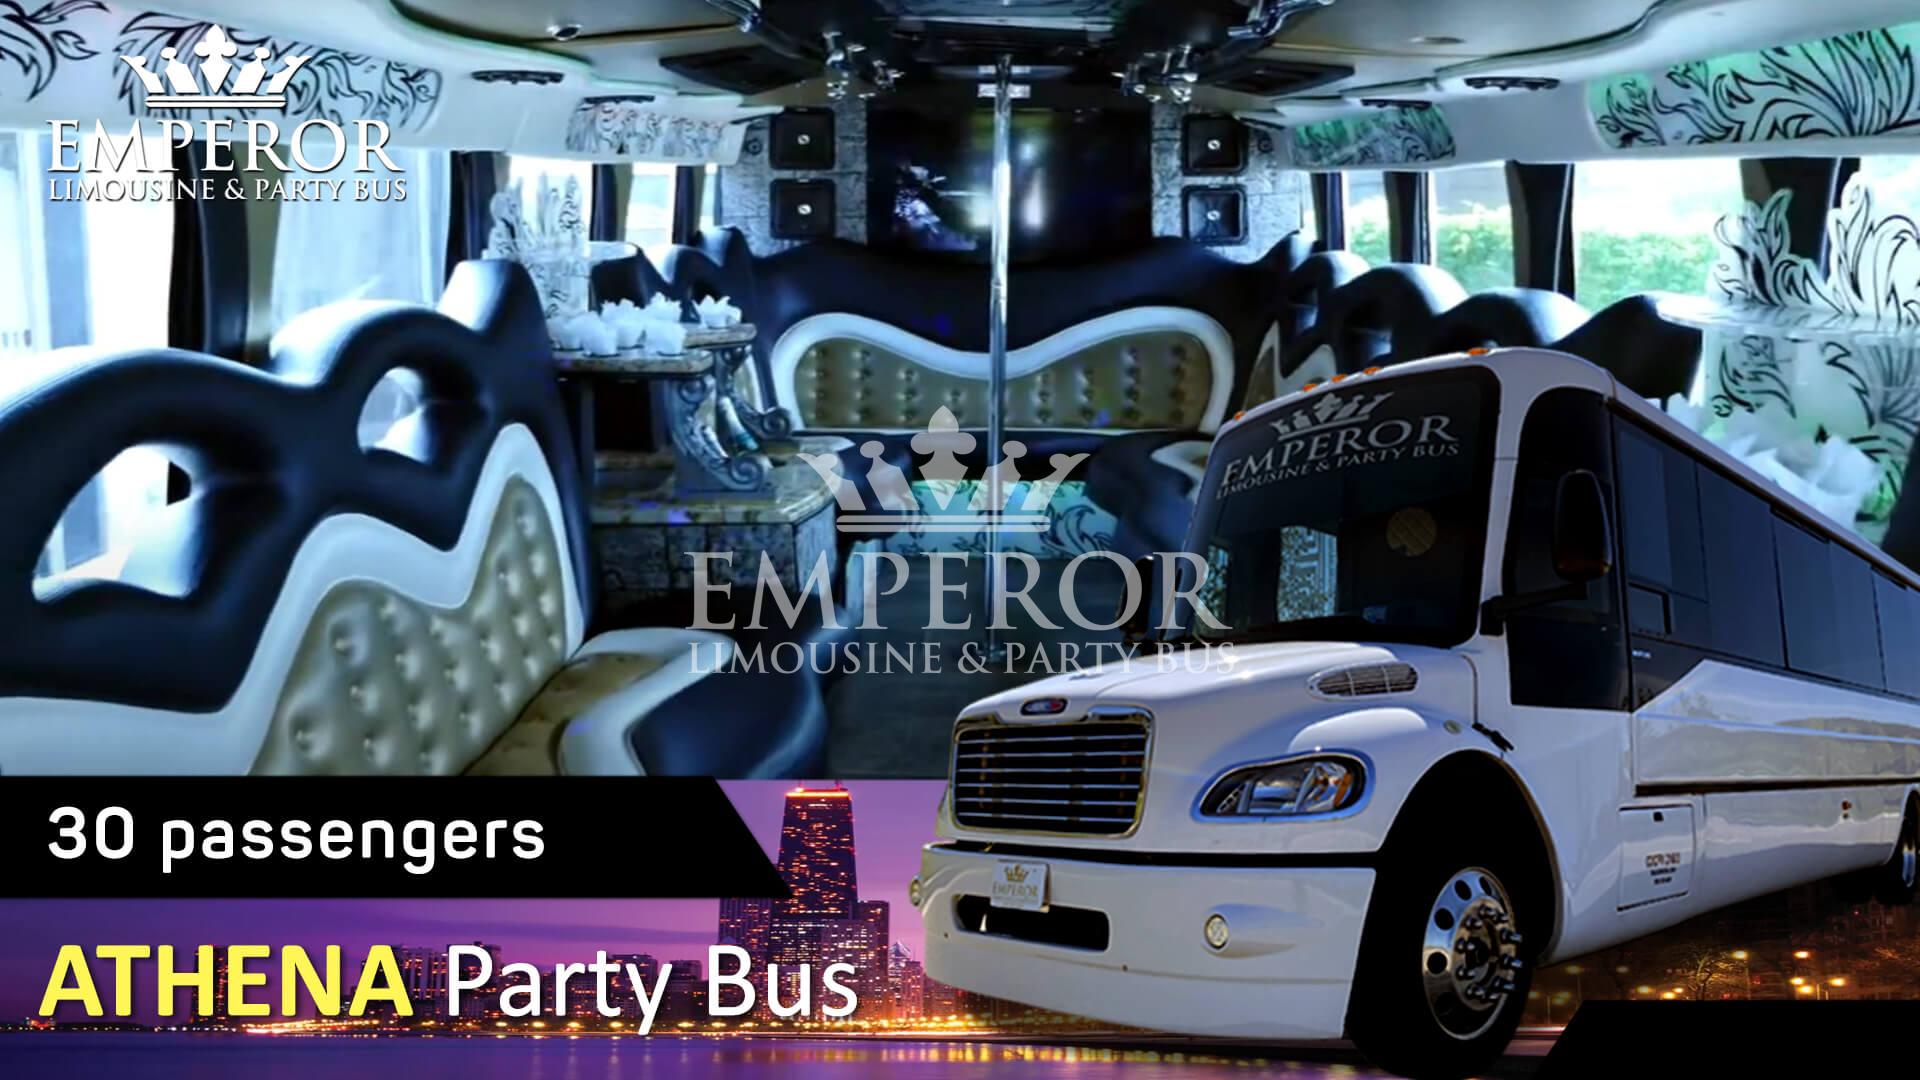 Party bus rental service in Brookfield - Athena Edition